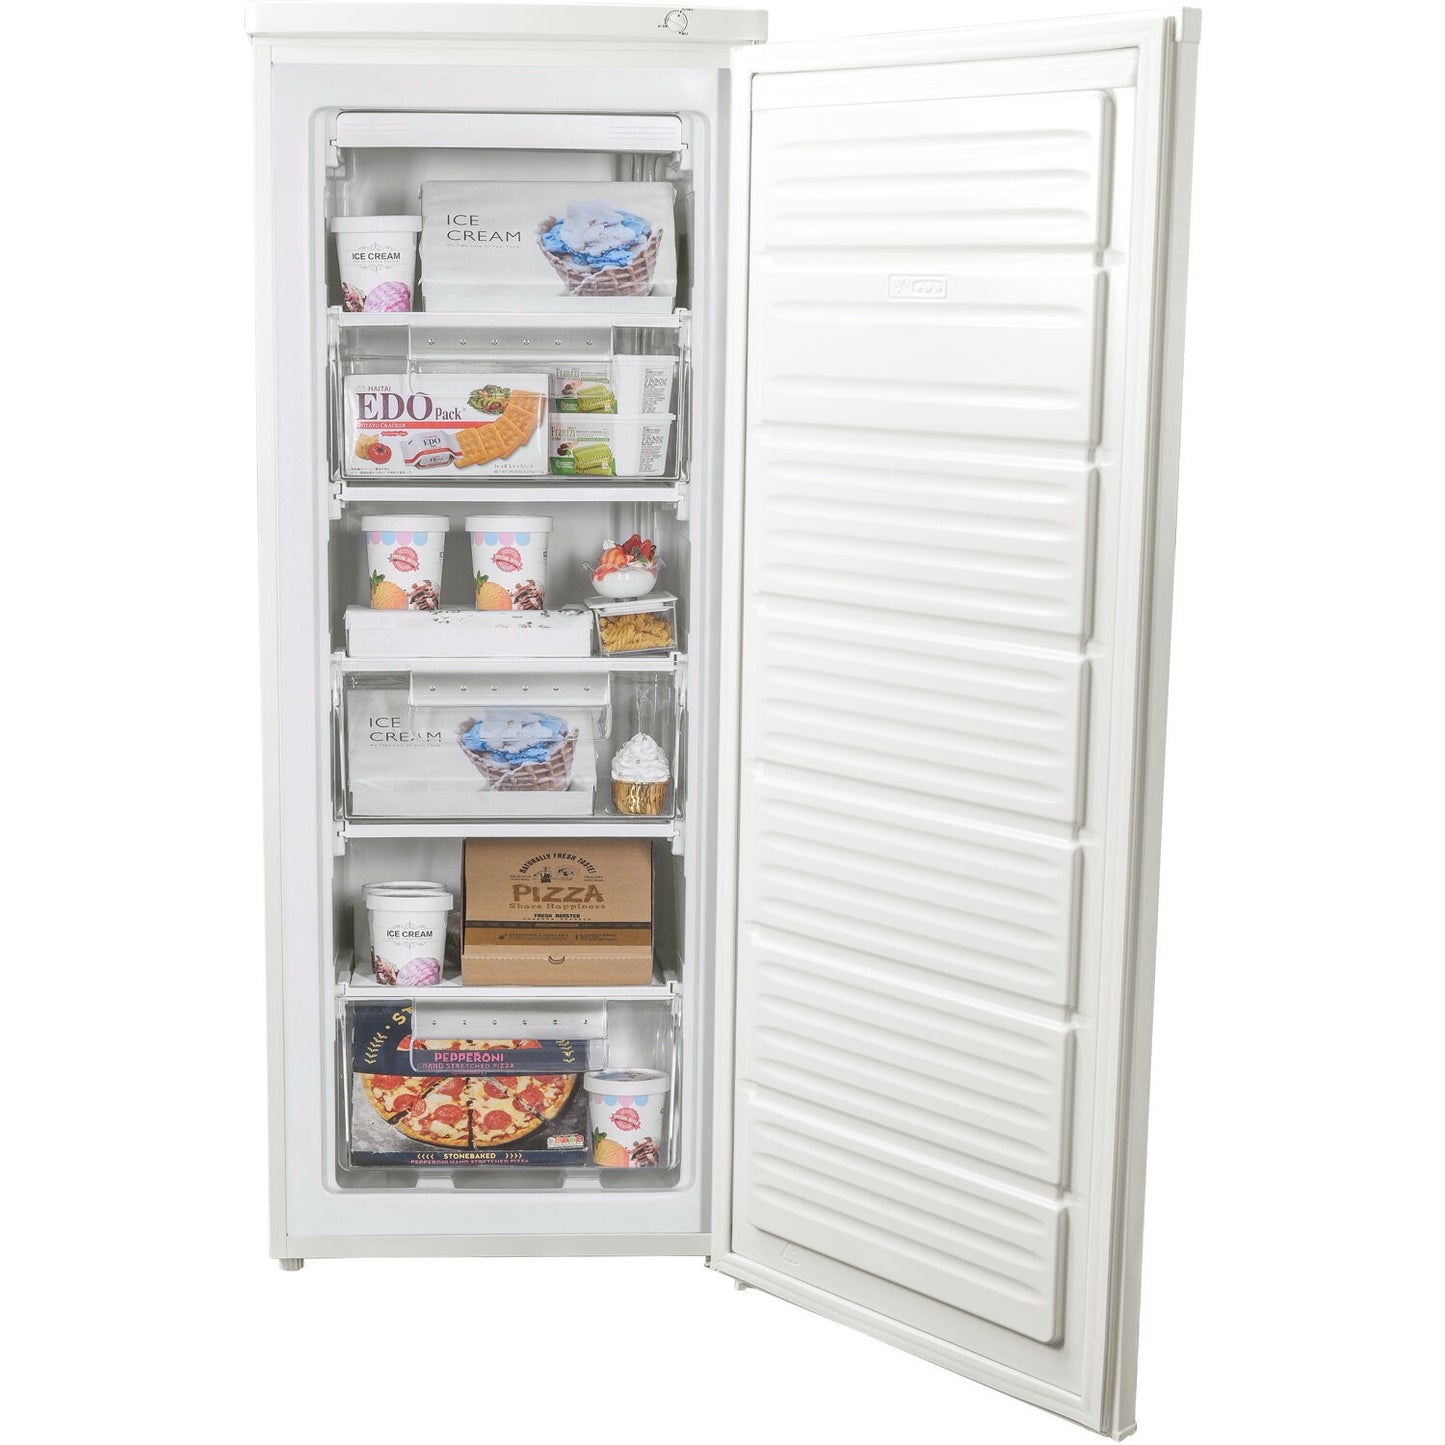 Danby 6 Cu.Ft Upright Freezer | Manual Defrost | Mechanical Thermostat | Energy Star Rated